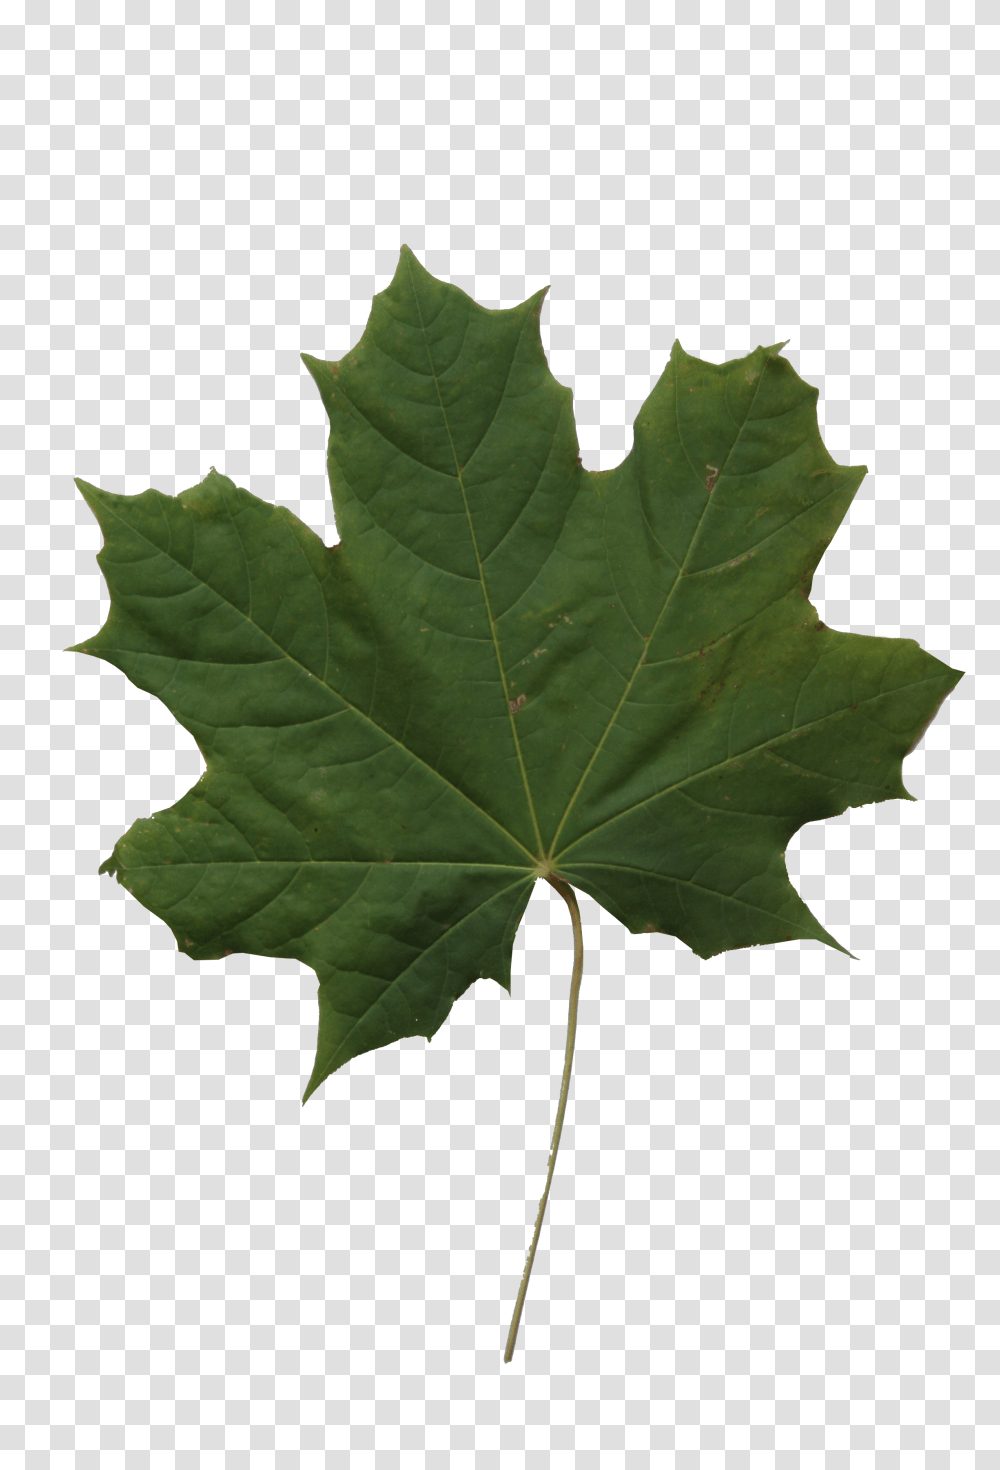 Maple Leaf Texture Free Cut Out People Trees And Leaves, Plant Transparent Png